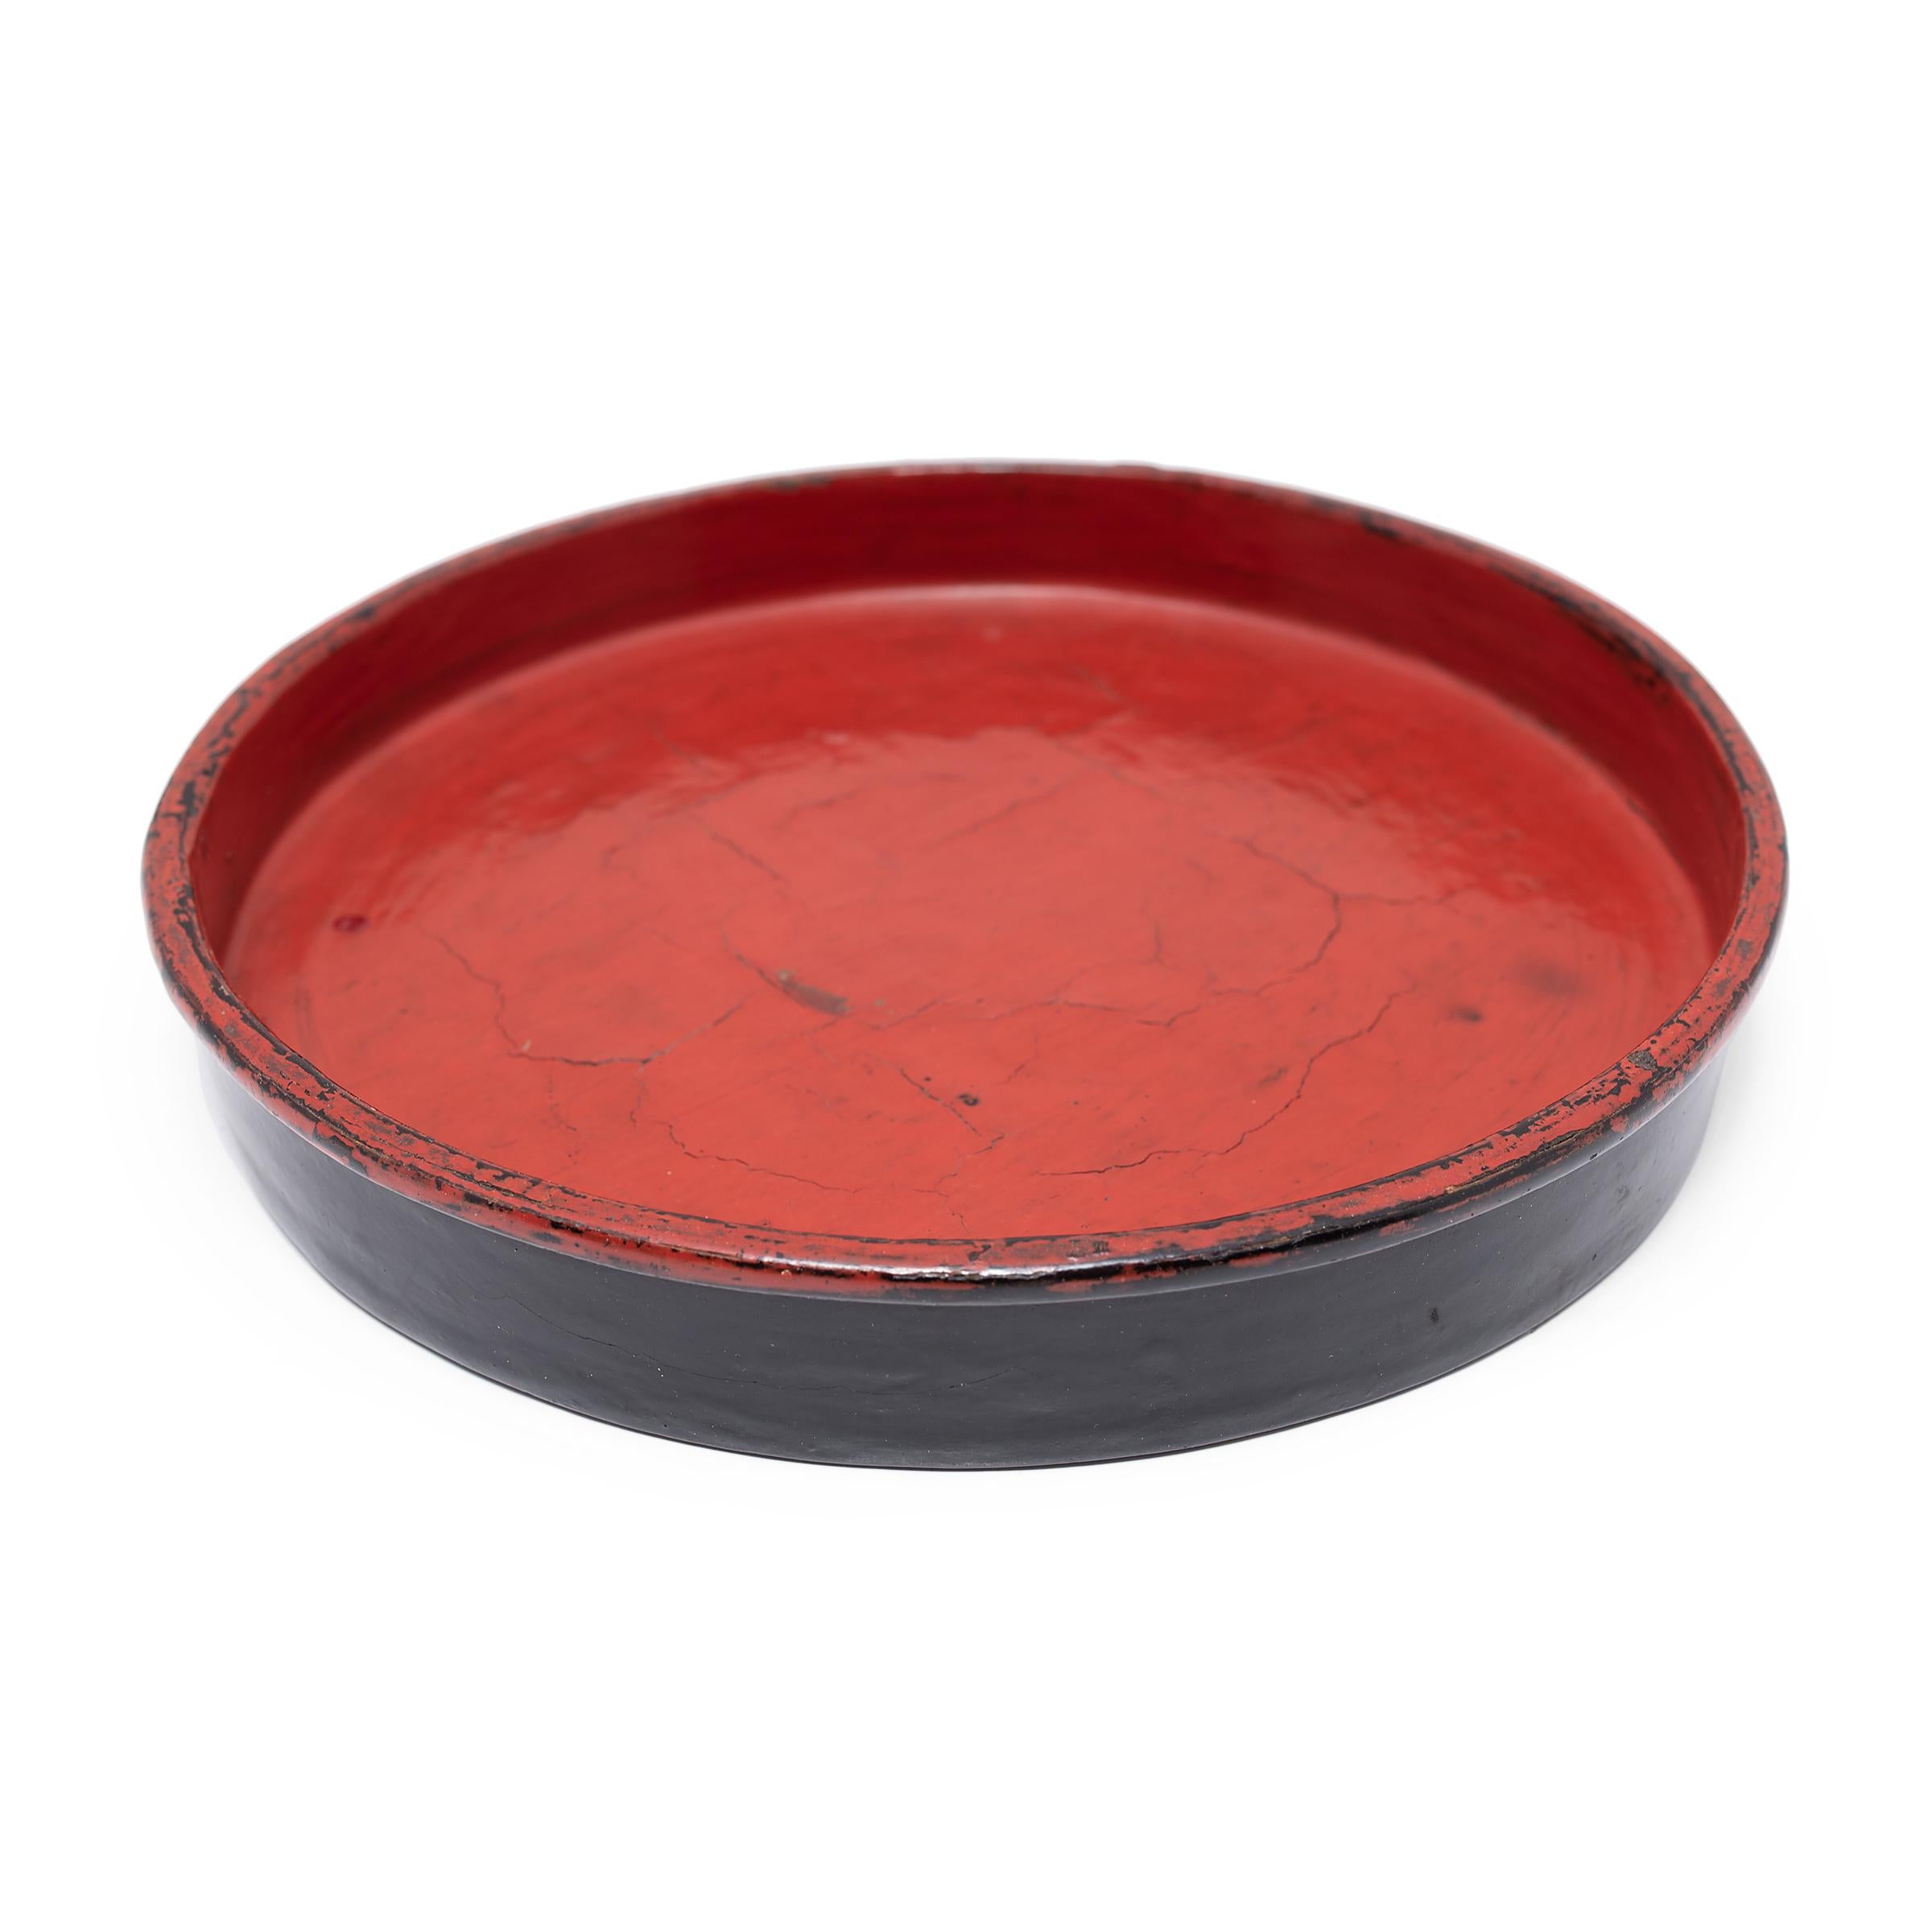 This round tray dates to the early 20th century and is a simple example of Burmese lacquerware. The tray is formed of thin bamboo strips that have been woven and coiled into shape, held in place with a putty of lacquer and sawdust, and finished with